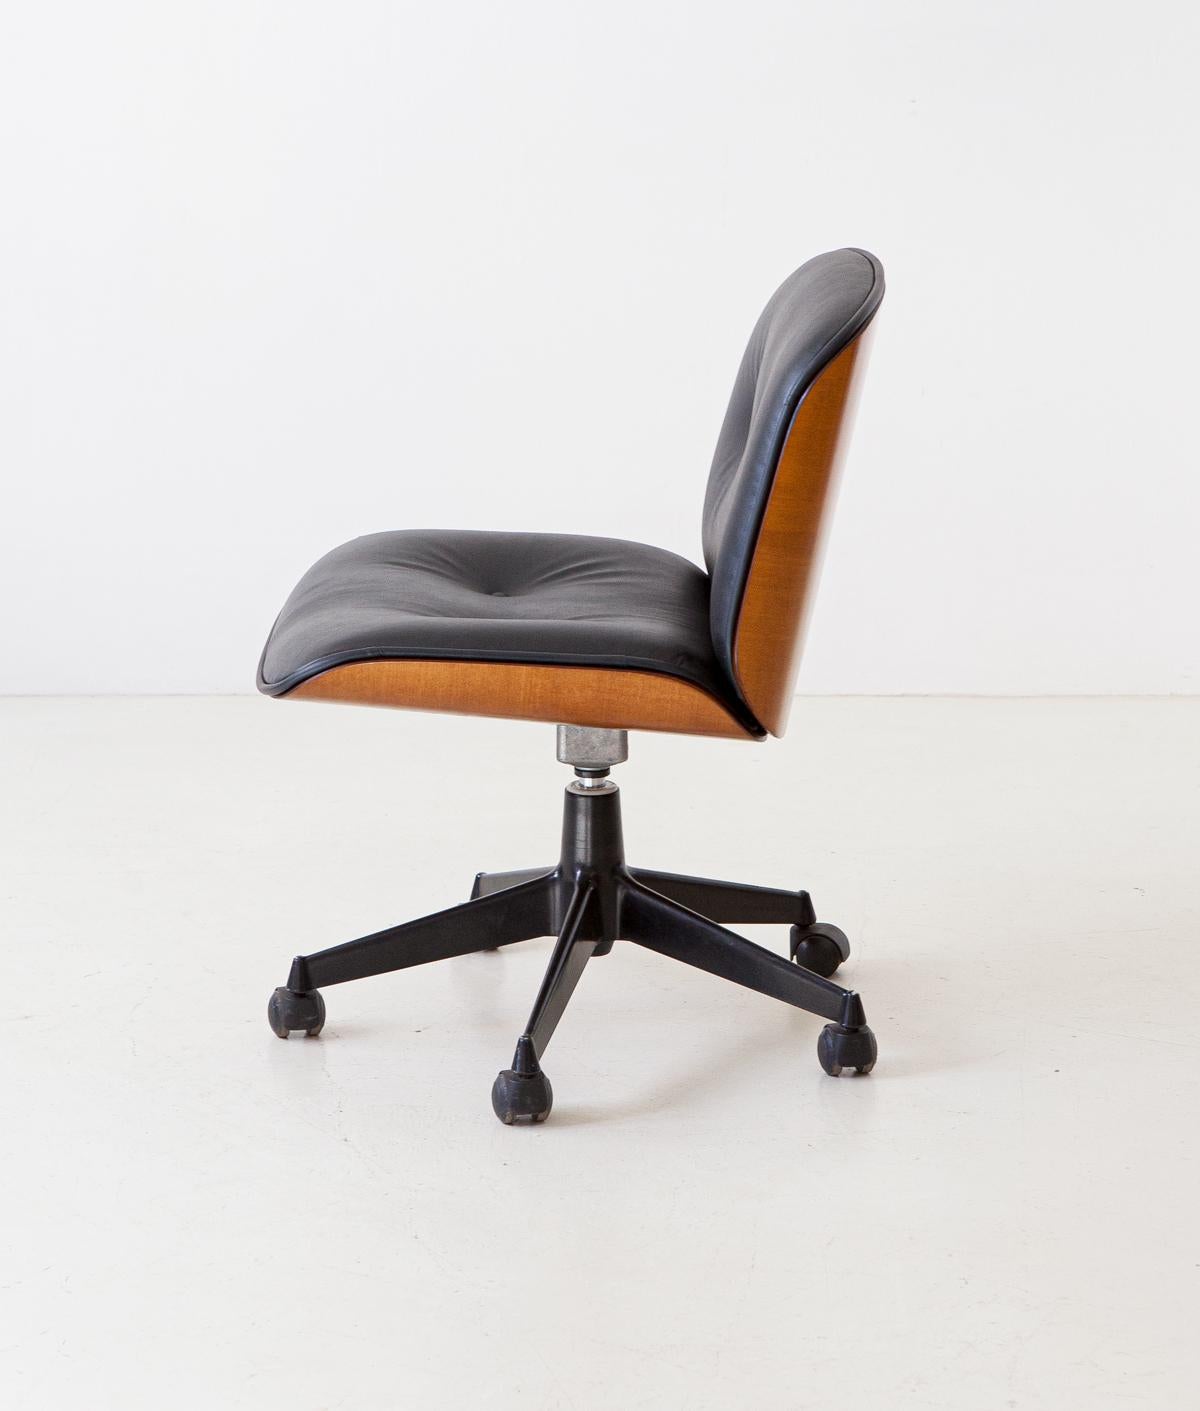 Italian 1960s Swivel Desk Chair with New Black Leather by Ico Parisi for MIM Roma